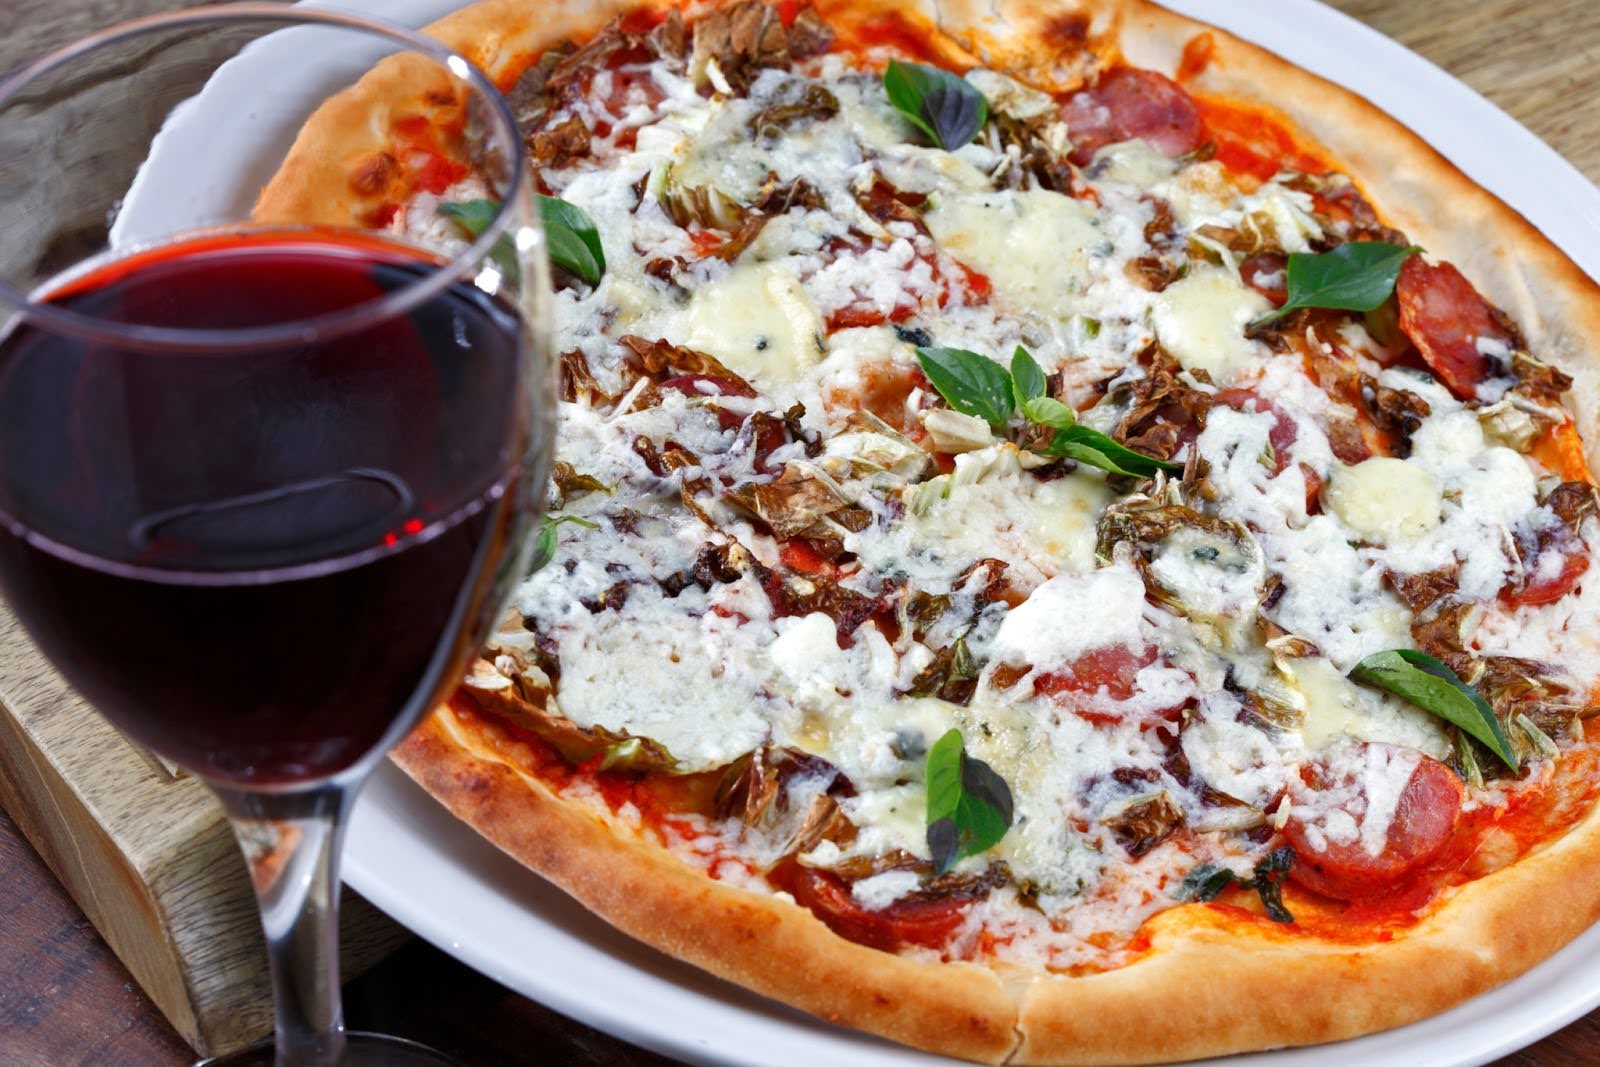 Pairing wine with pizza